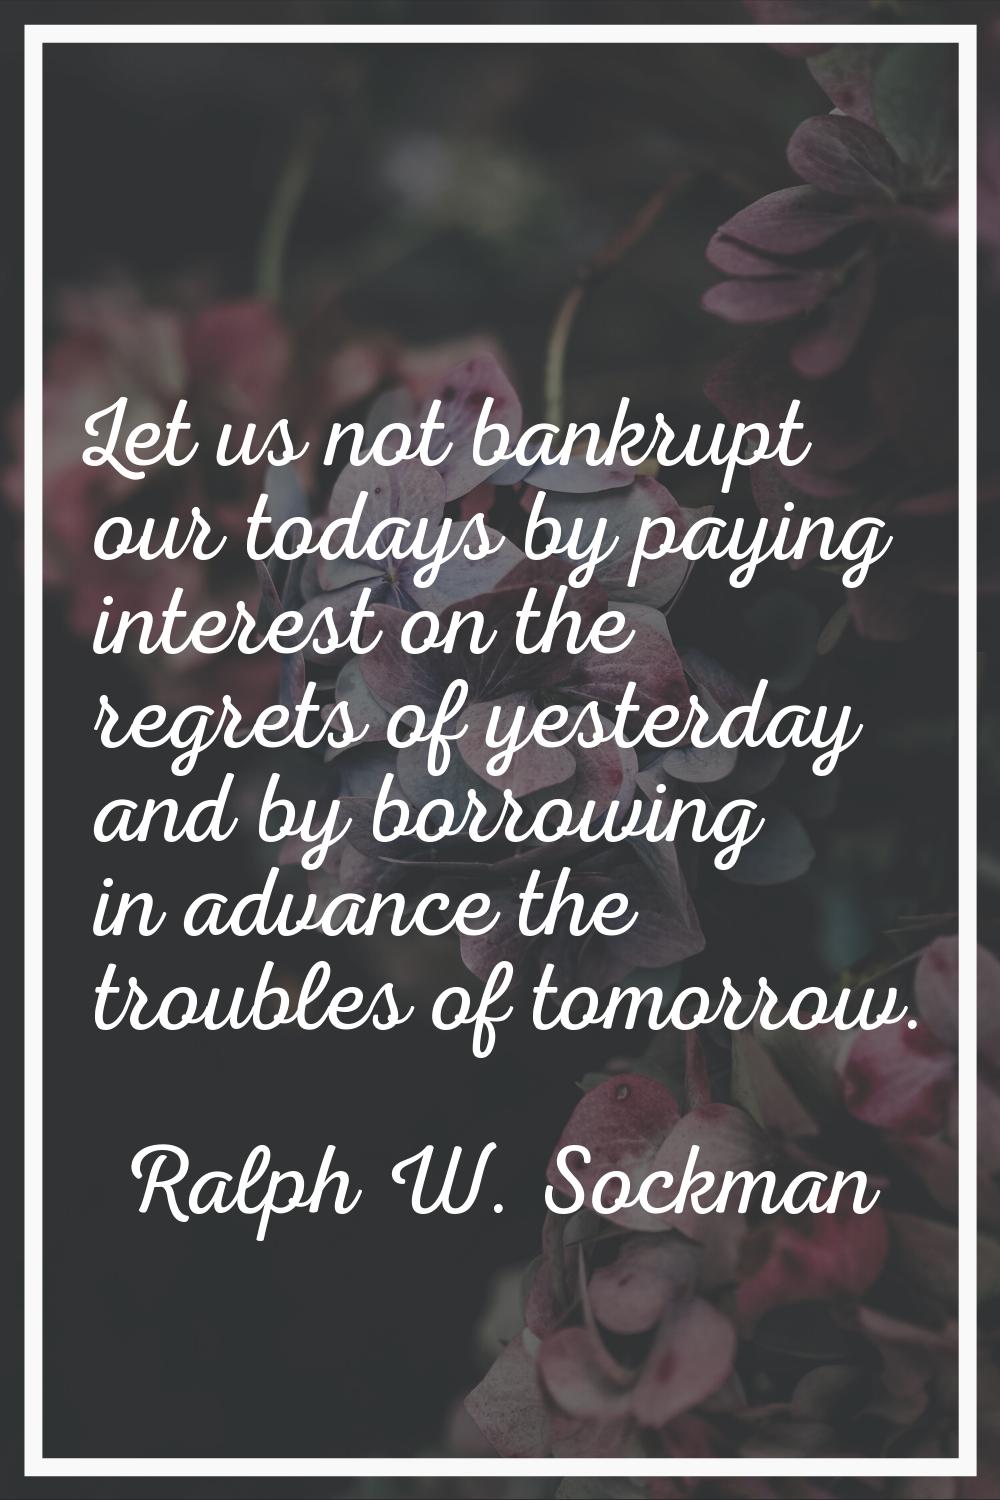 Let us not bankrupt our todays by paying interest on the regrets of yesterday and by borrowing in a